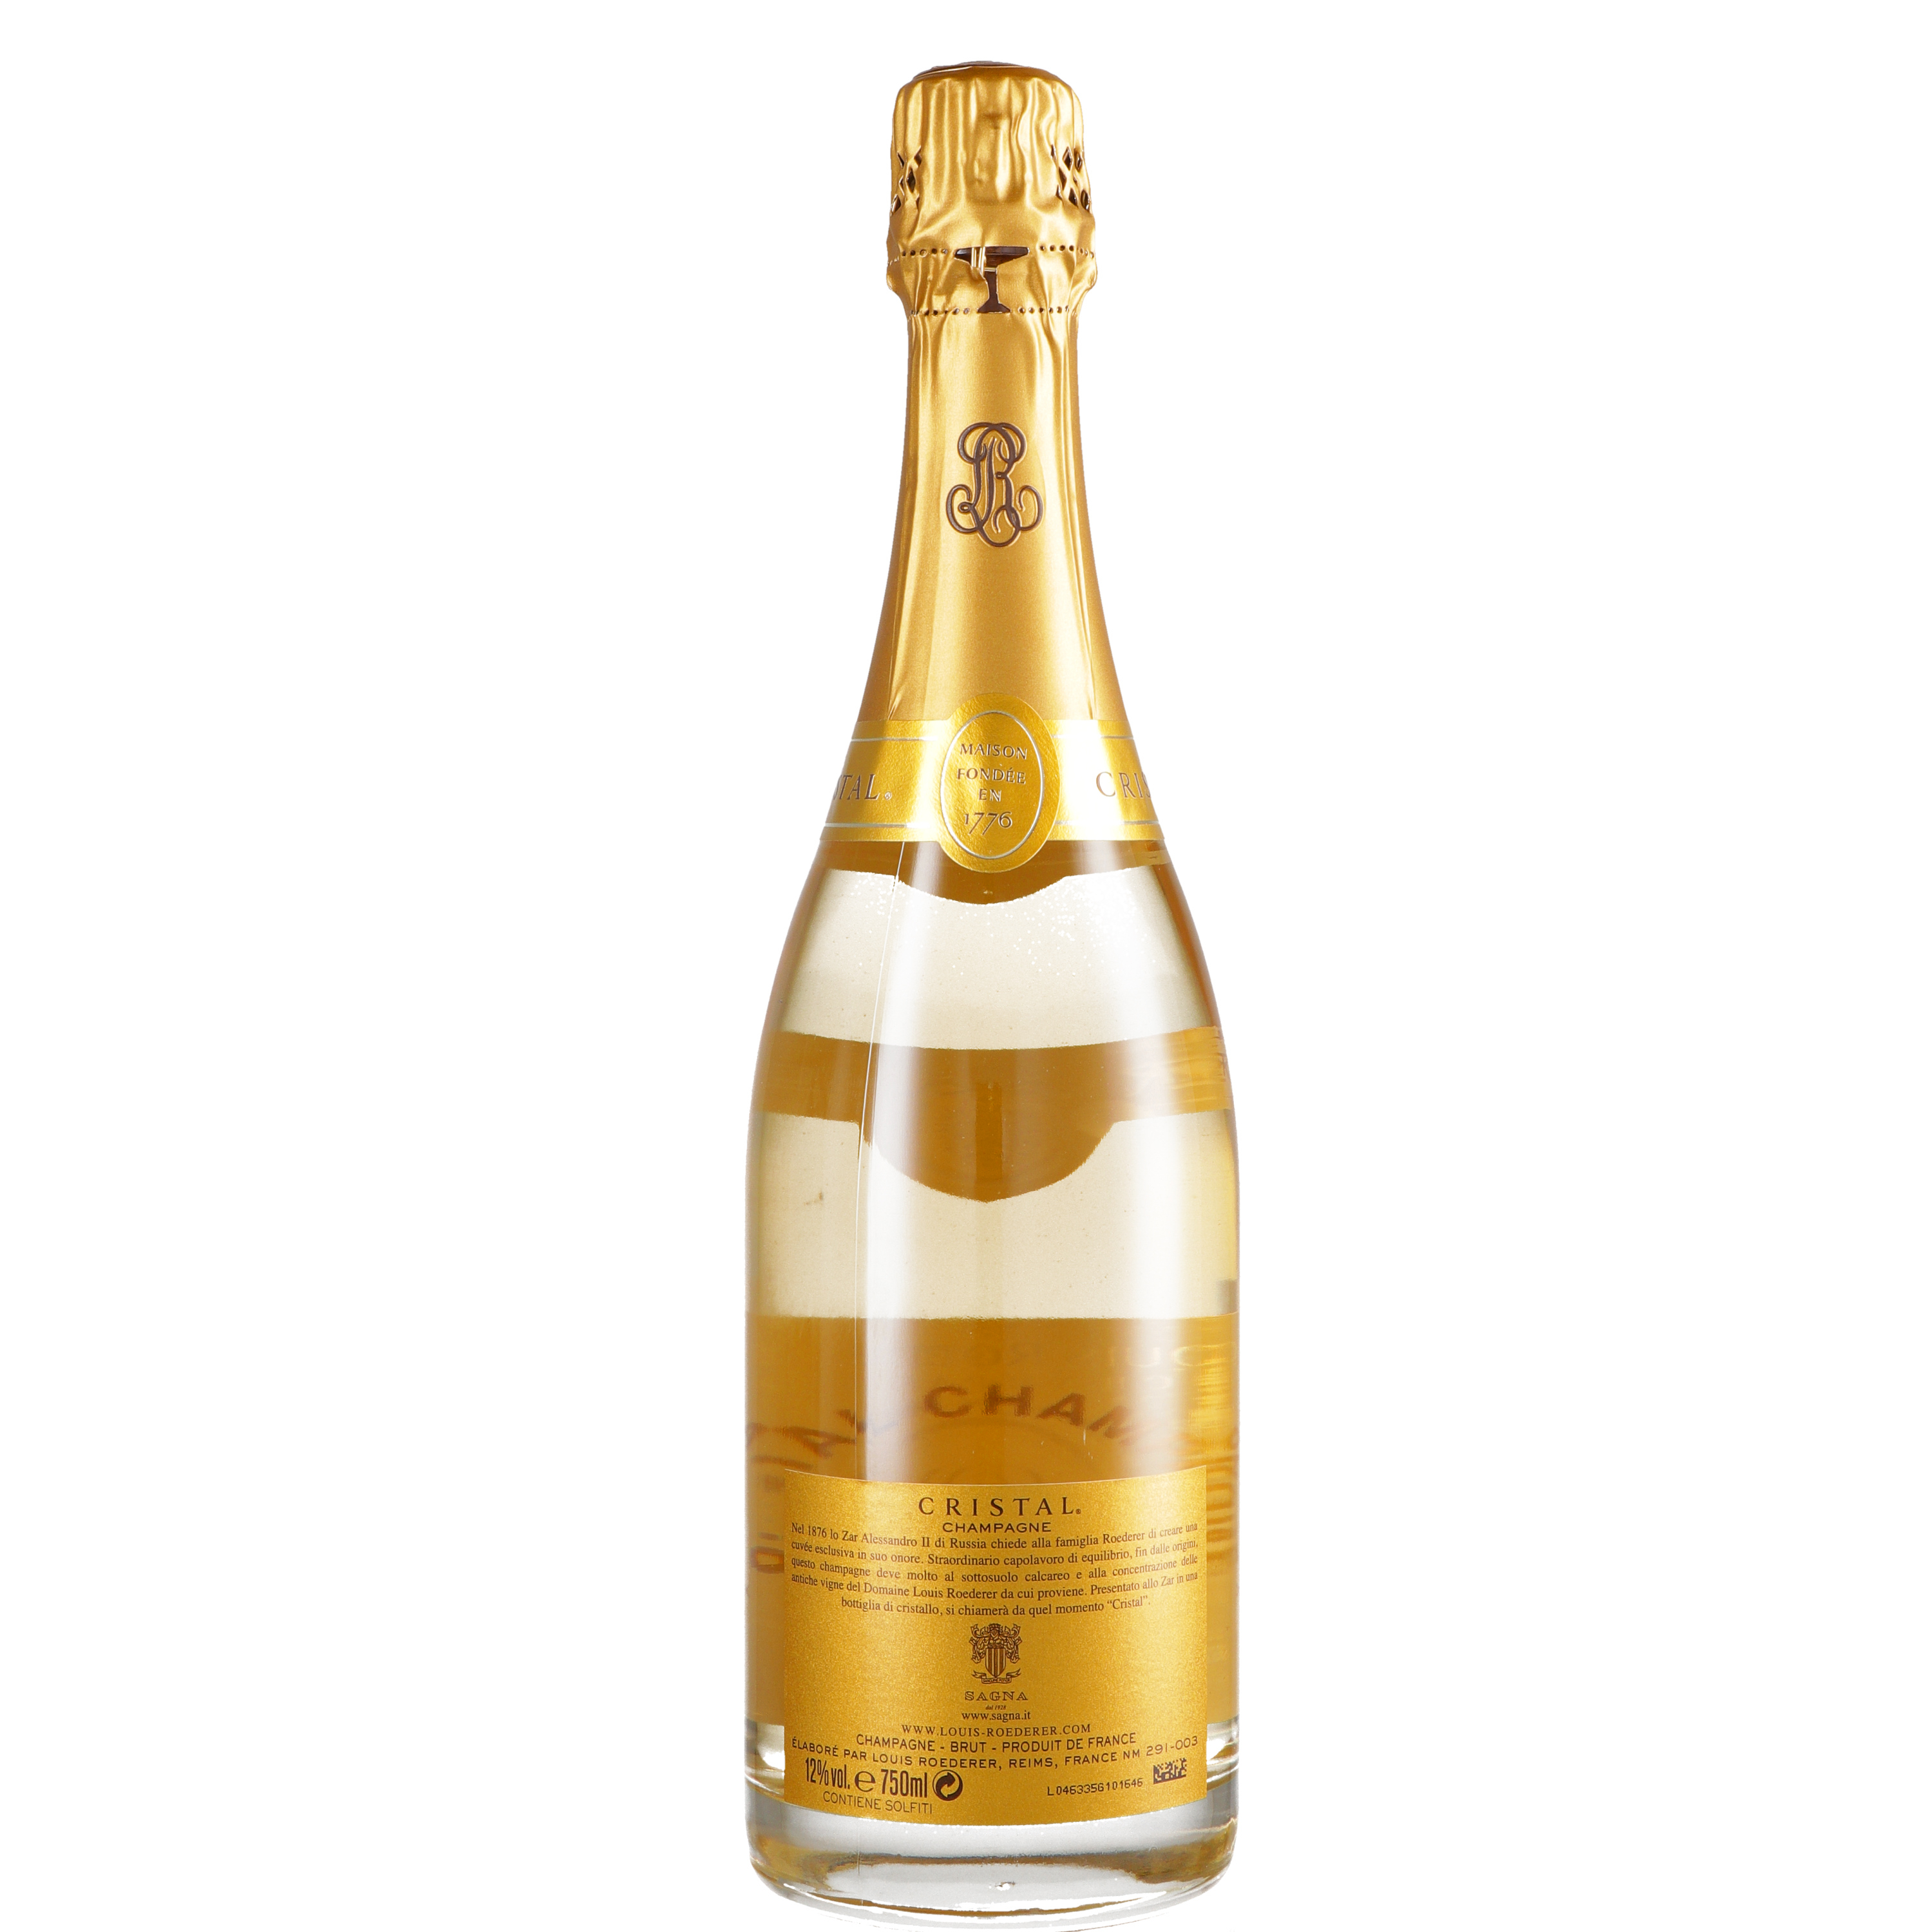 Champagne Cristal 2008 - Louis Roederer